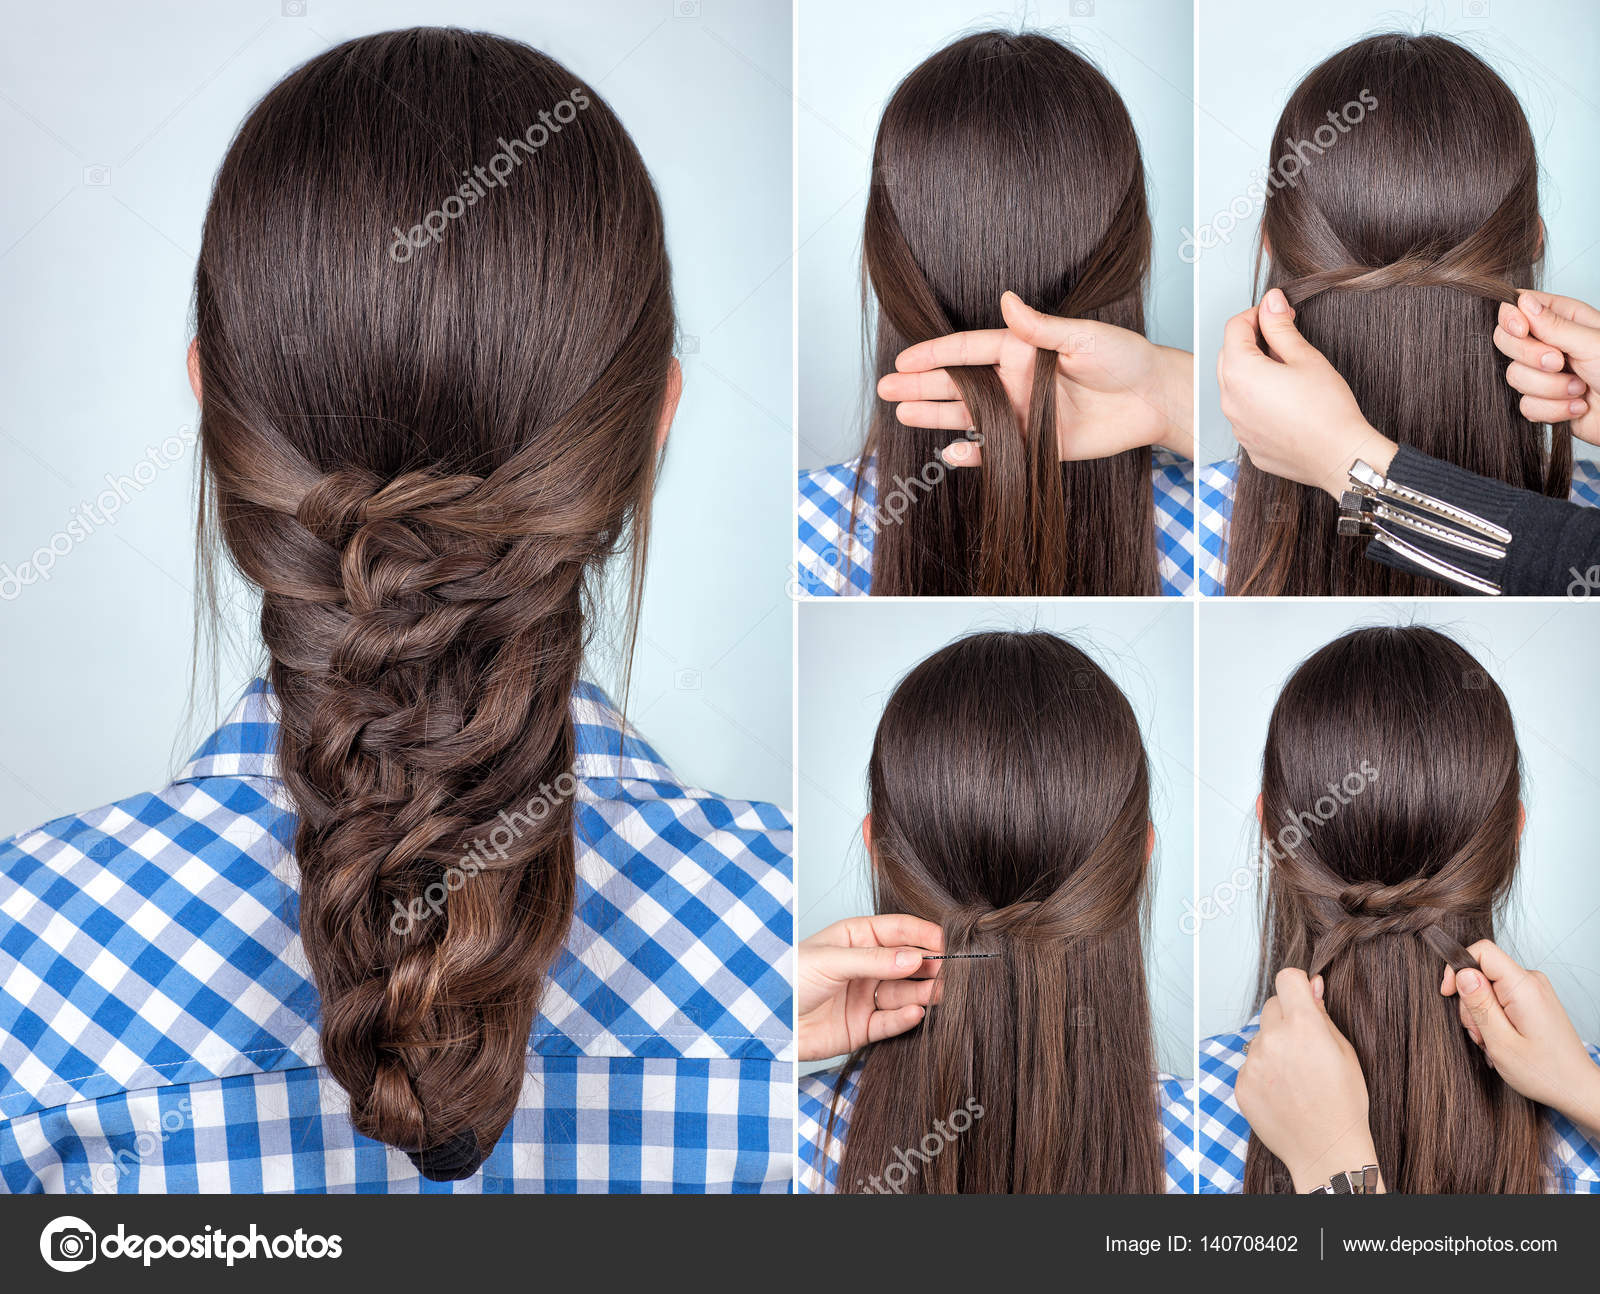 Images Easy Hairstyle Simple Hairstyle Tutorial Stock